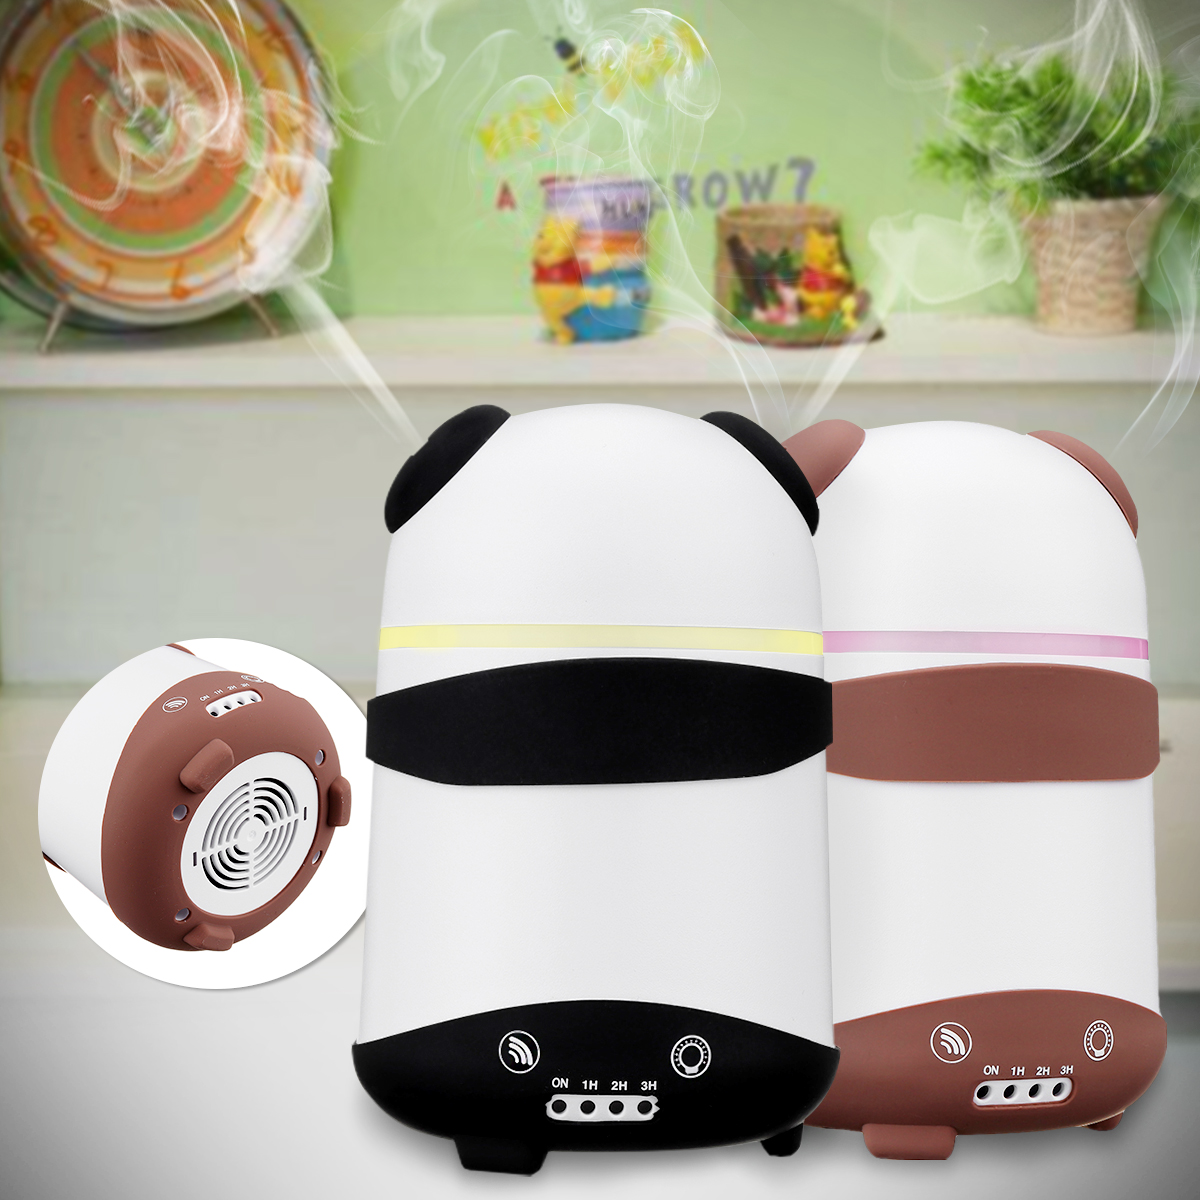 Dual Humidifier Air Oil Diffuser Aroma Mist Maker LED Cartoon Panda Style For Home Office US Plug 45